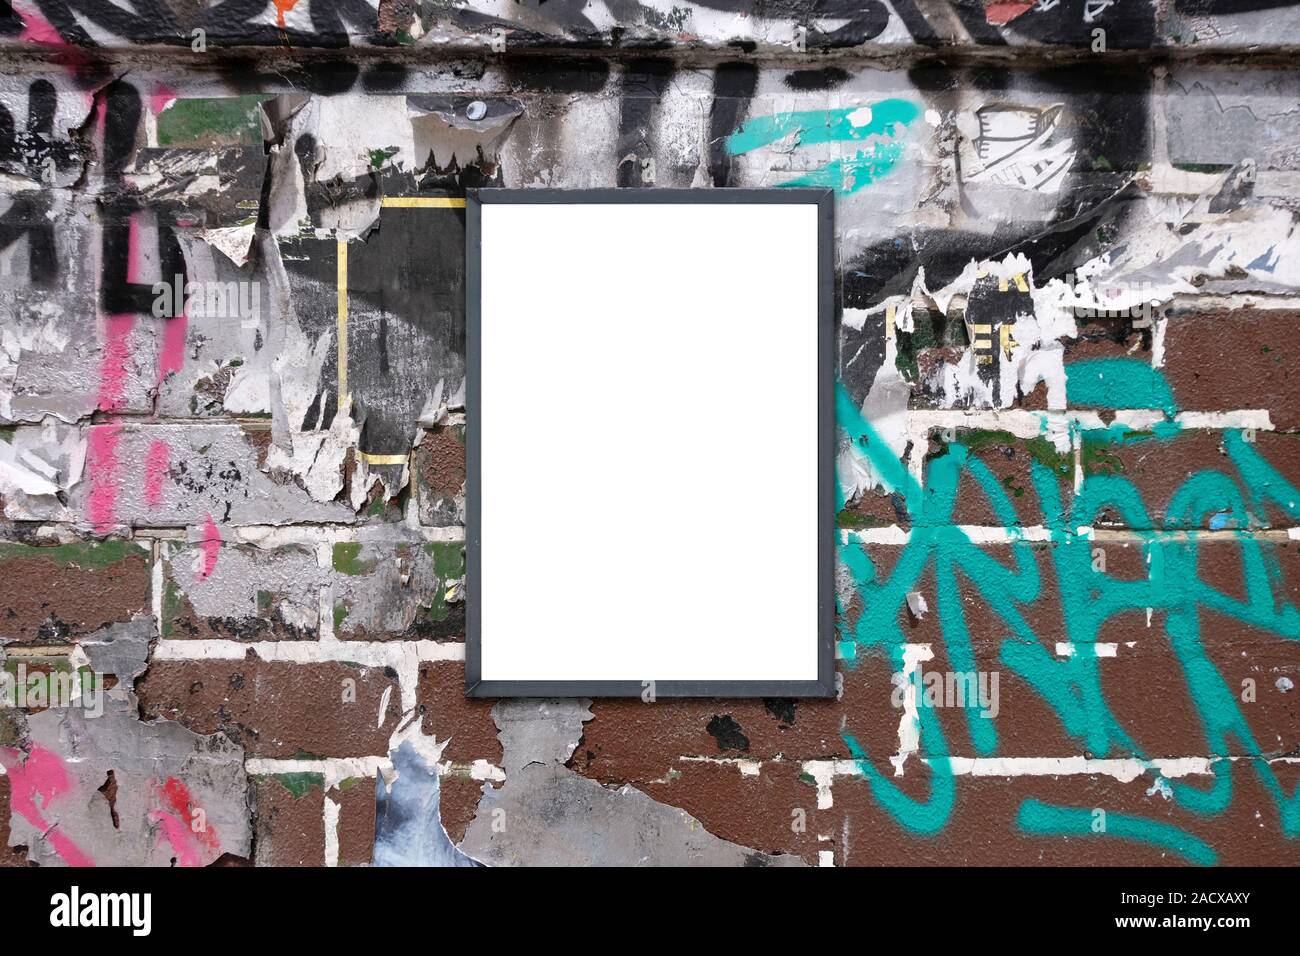 Blank notice advertising board for mockup on rough urban poster painted graffiti covered wall Stock Photo